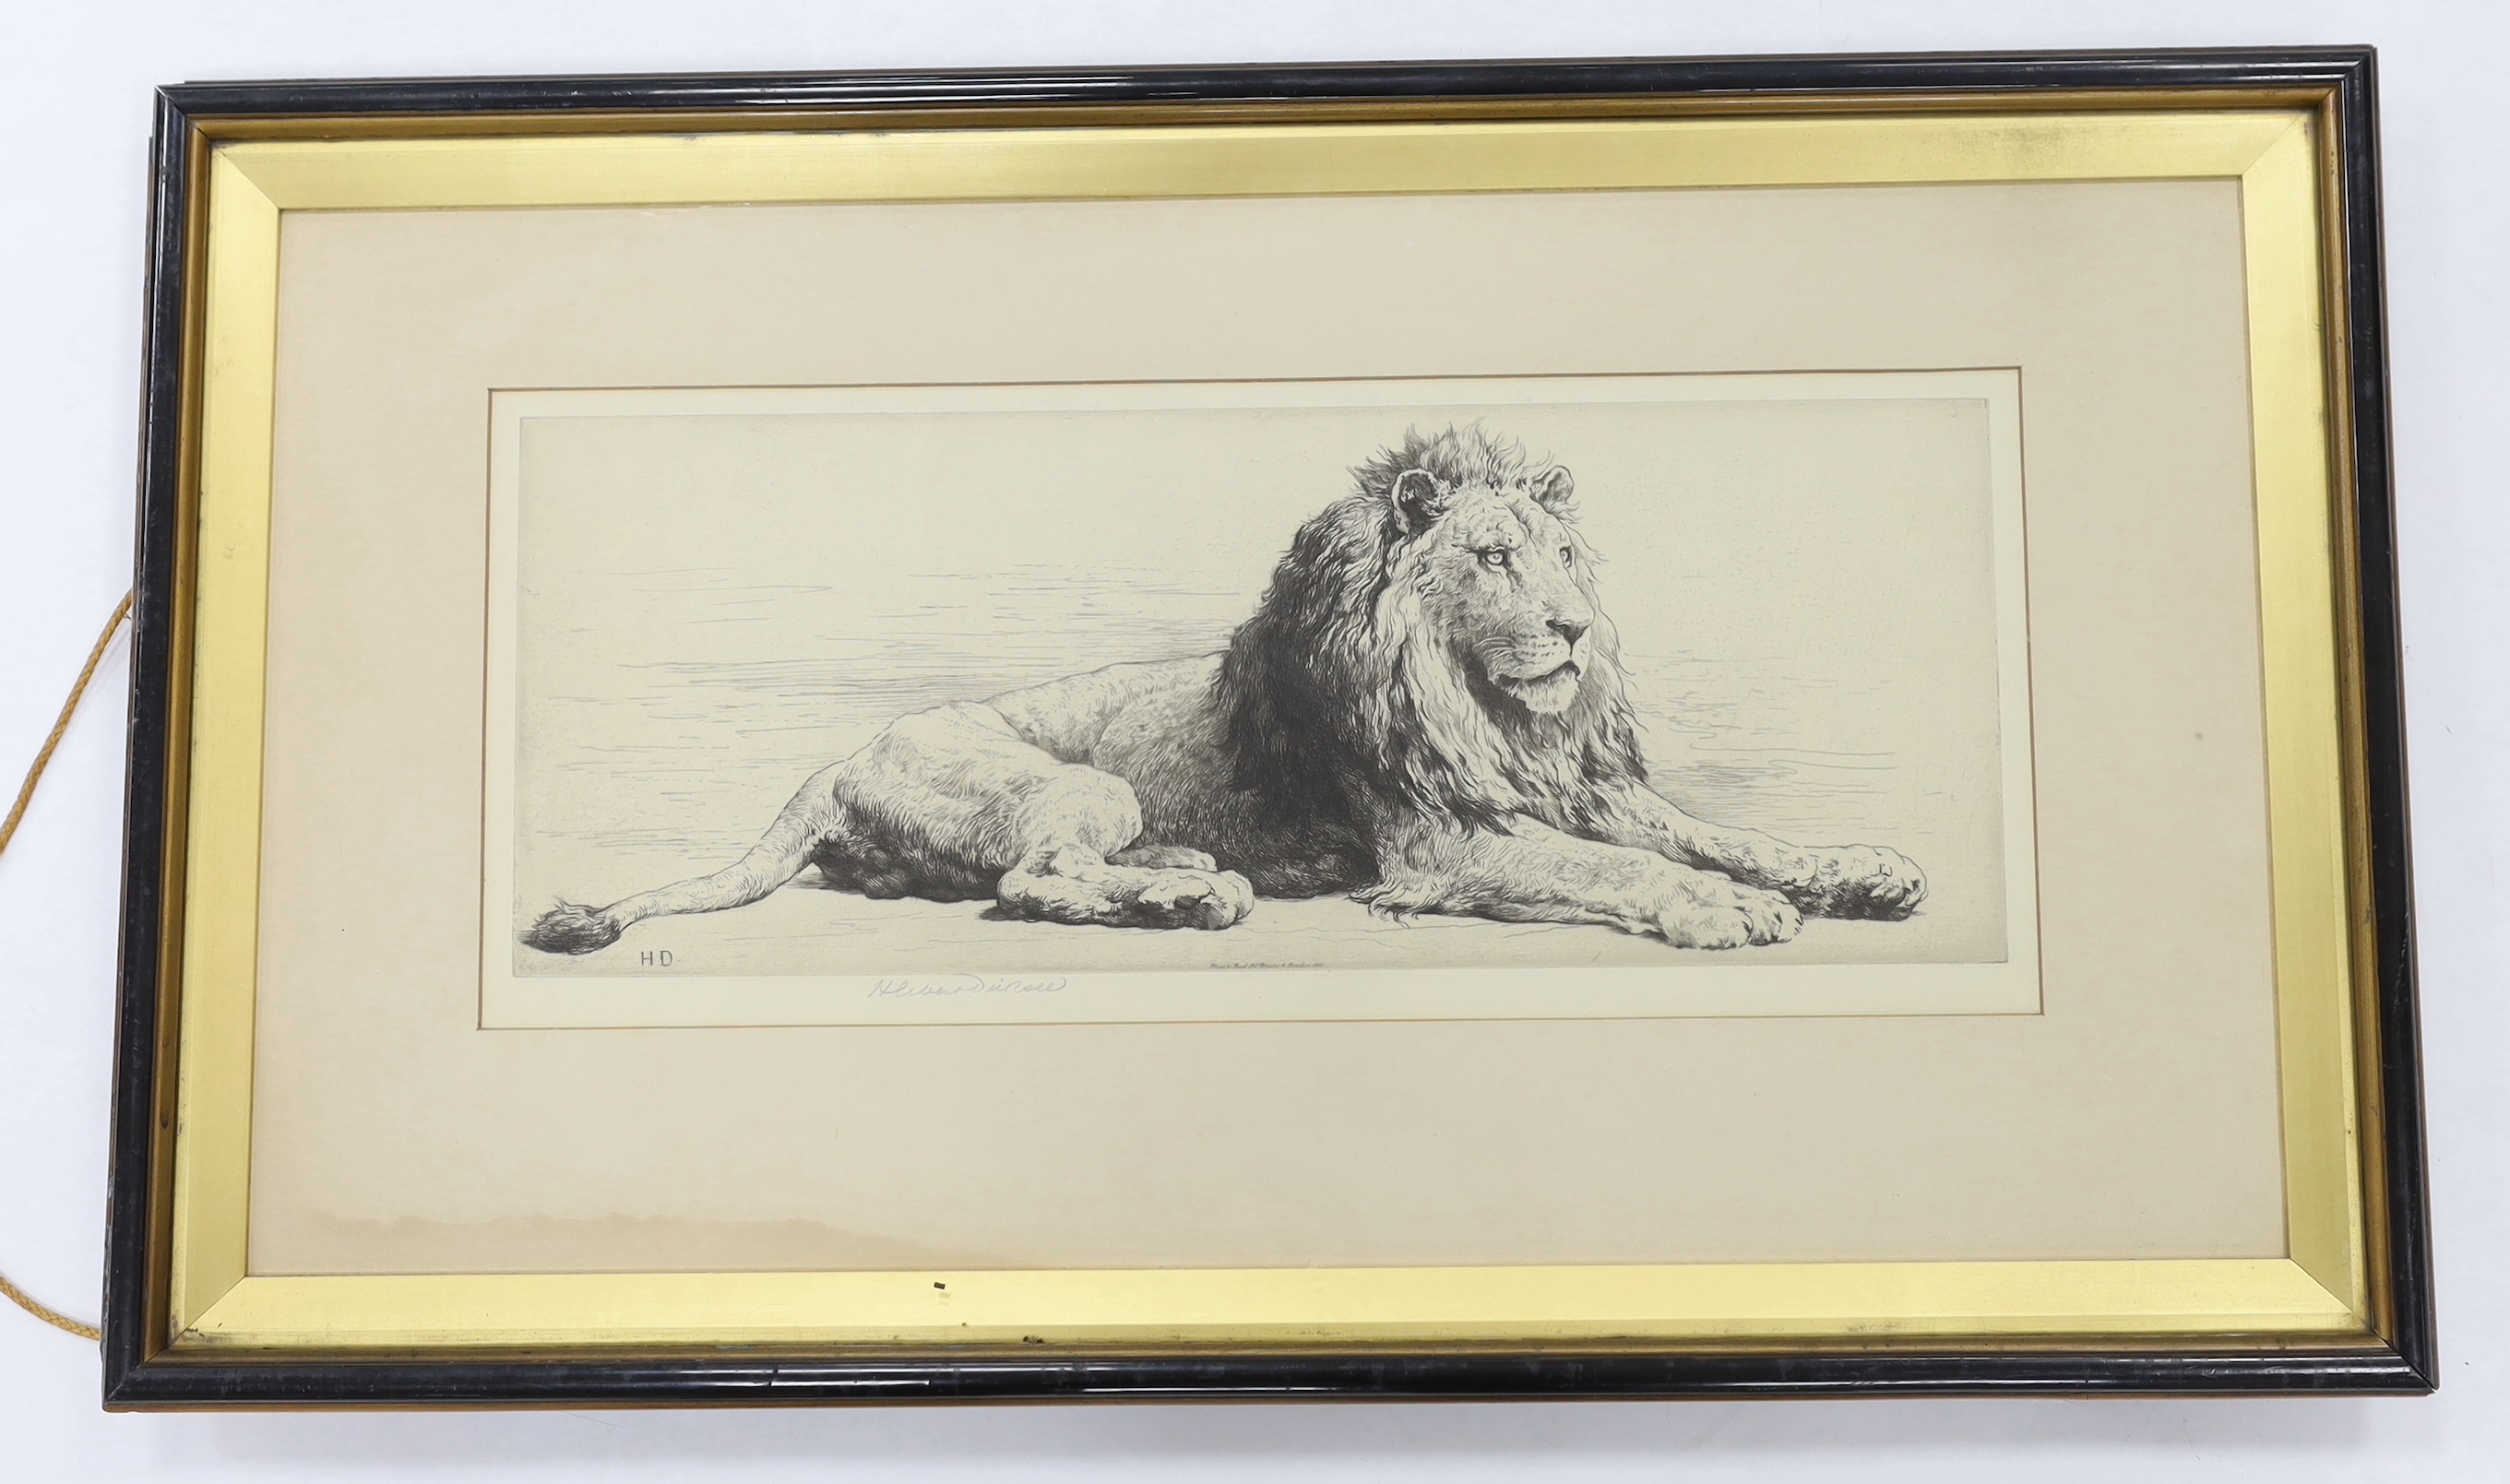 Herbert Dicksee (1862-1942), etching, Study of a Lion, signed in pencil, one of 150 signed proofs, publ. 1915, 20 x 50cm